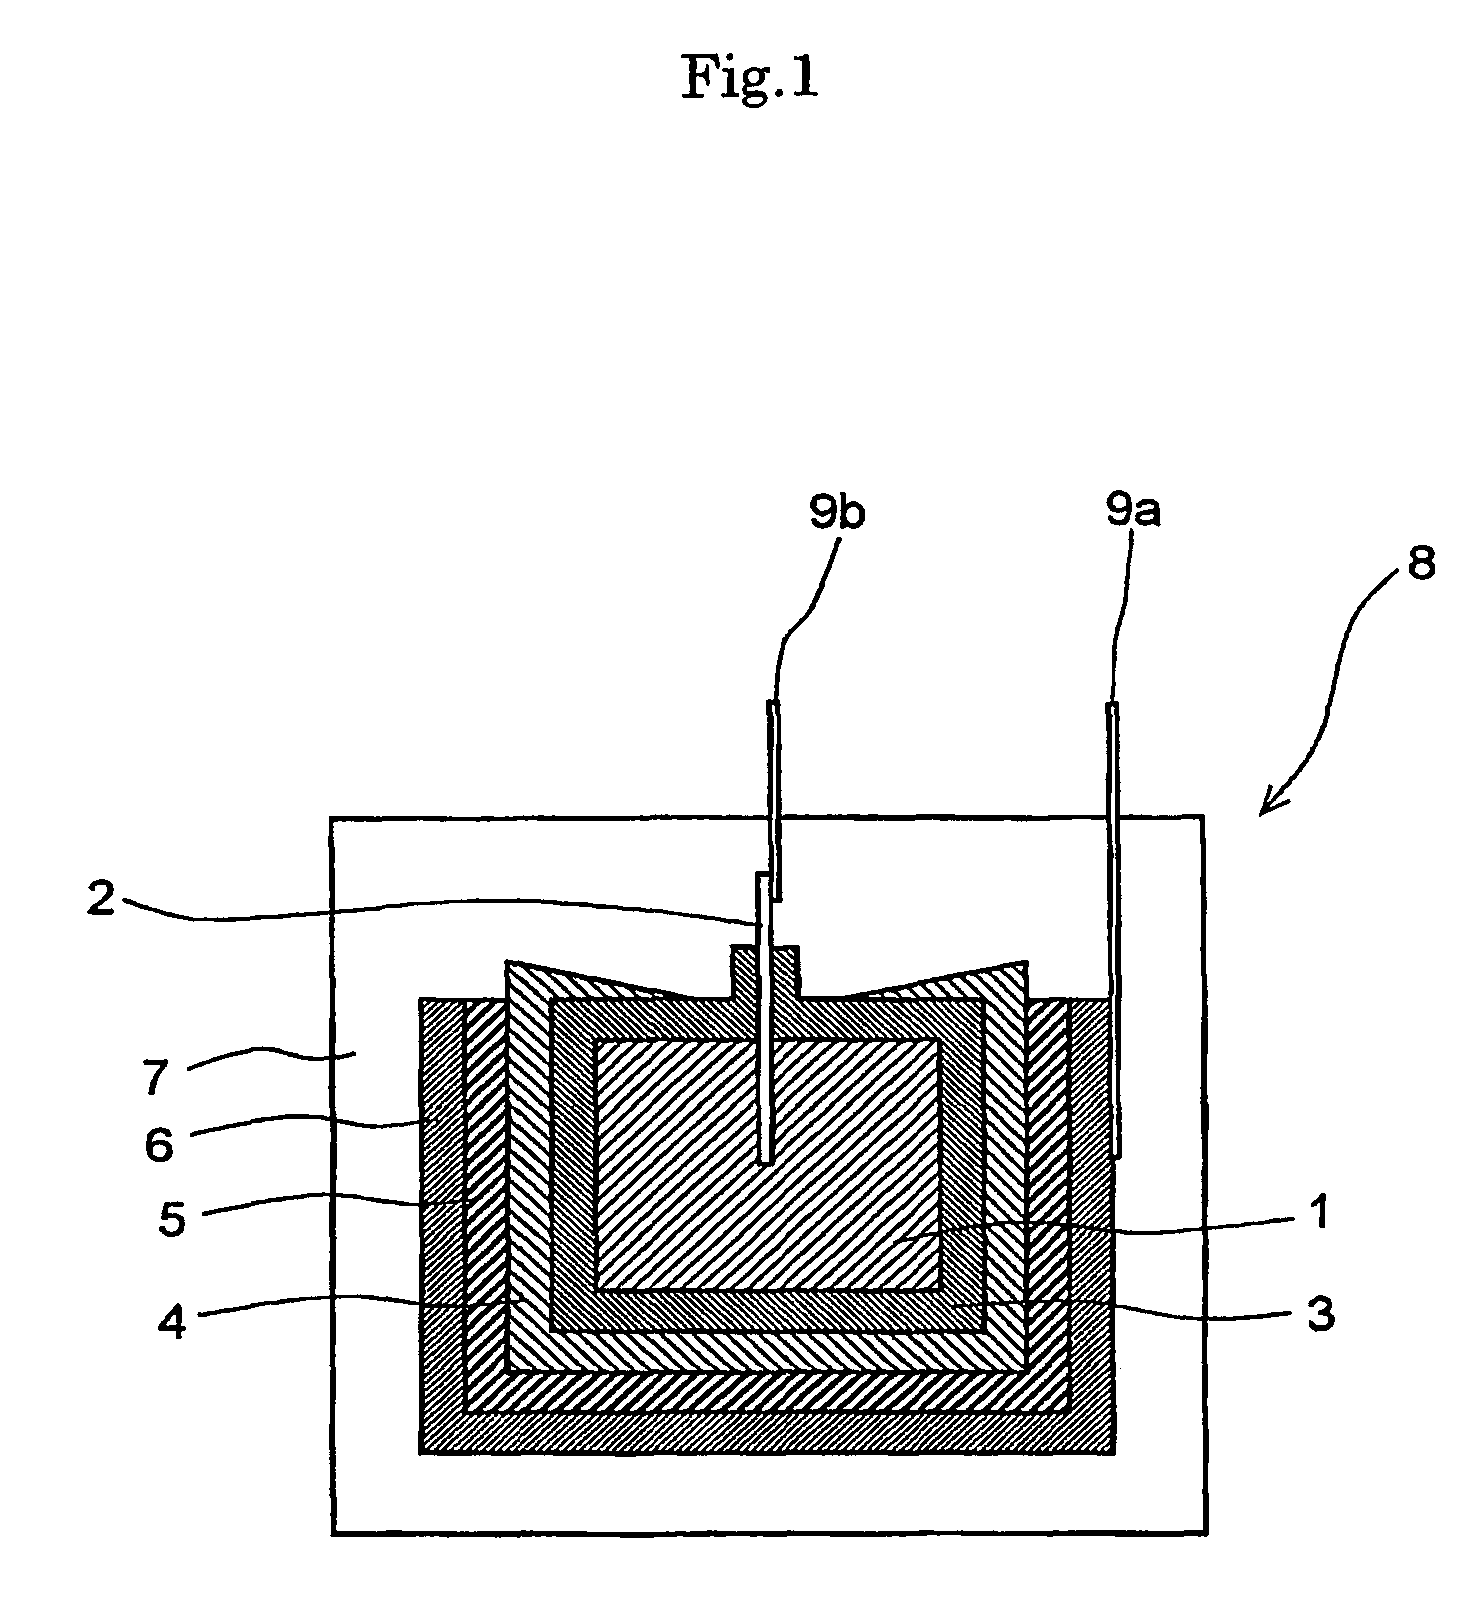 Solid electrolyte capacitor